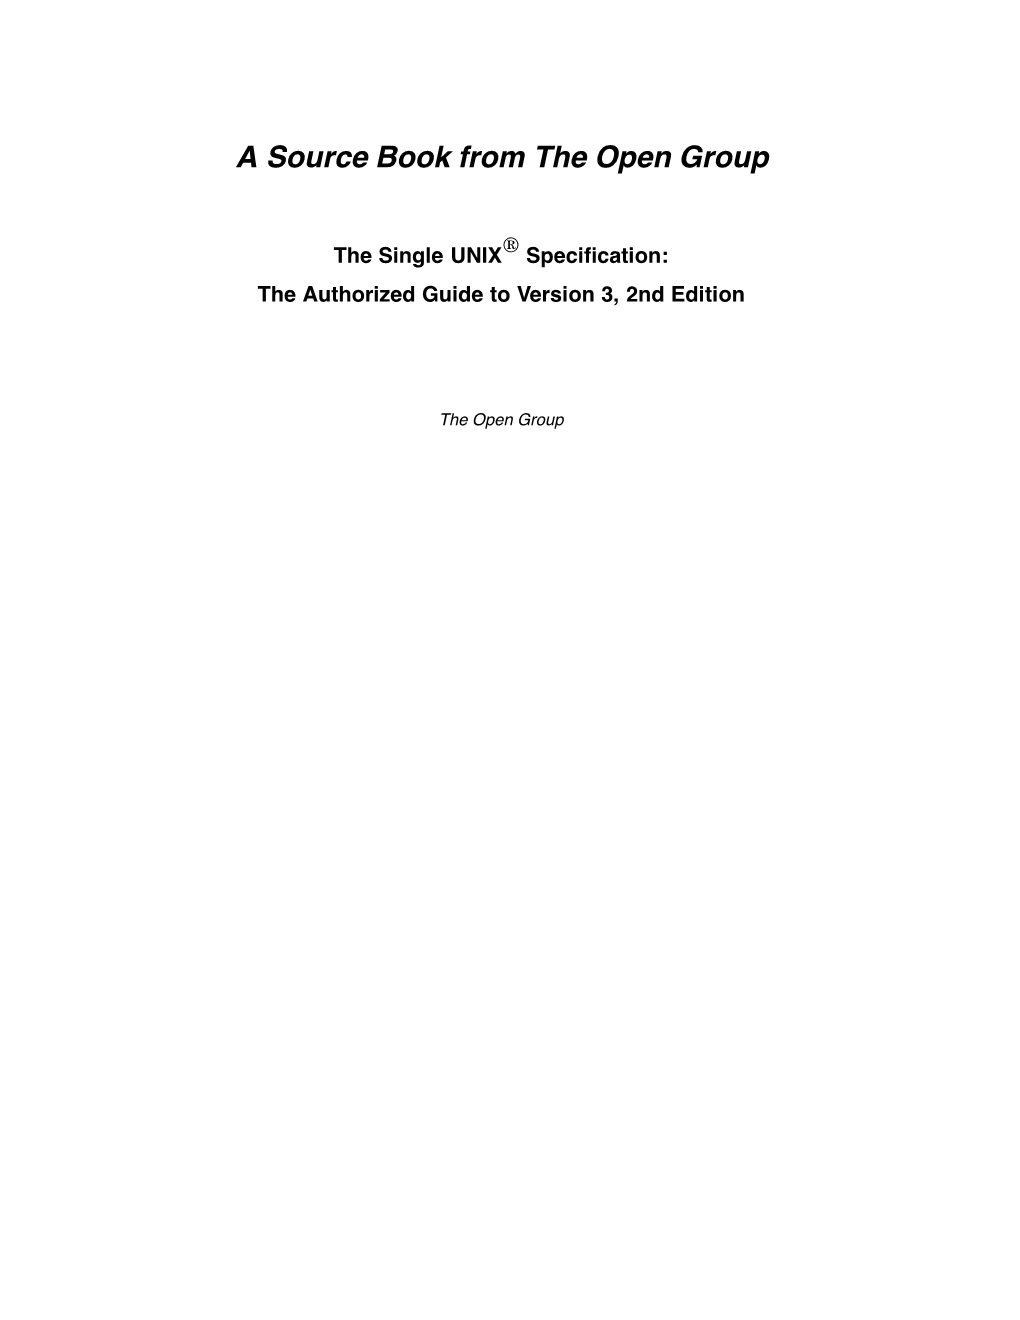 A Source Book from the Open Group